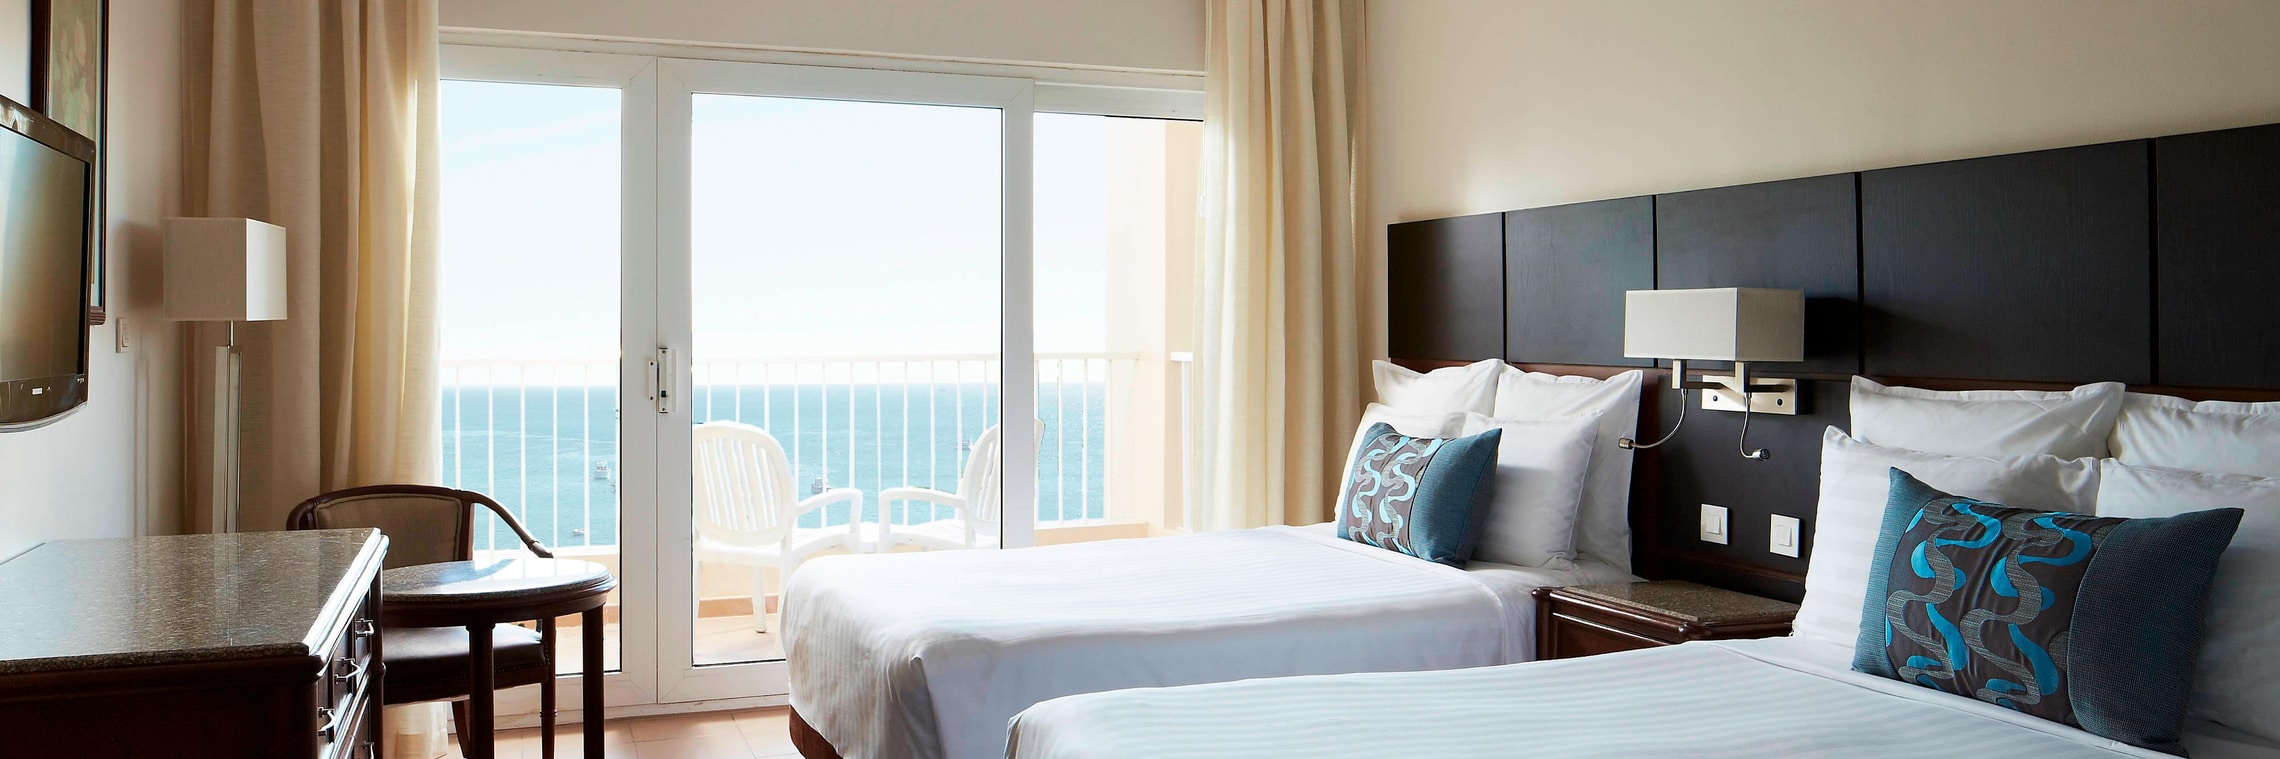 Double/Double Guest Room - Sea View